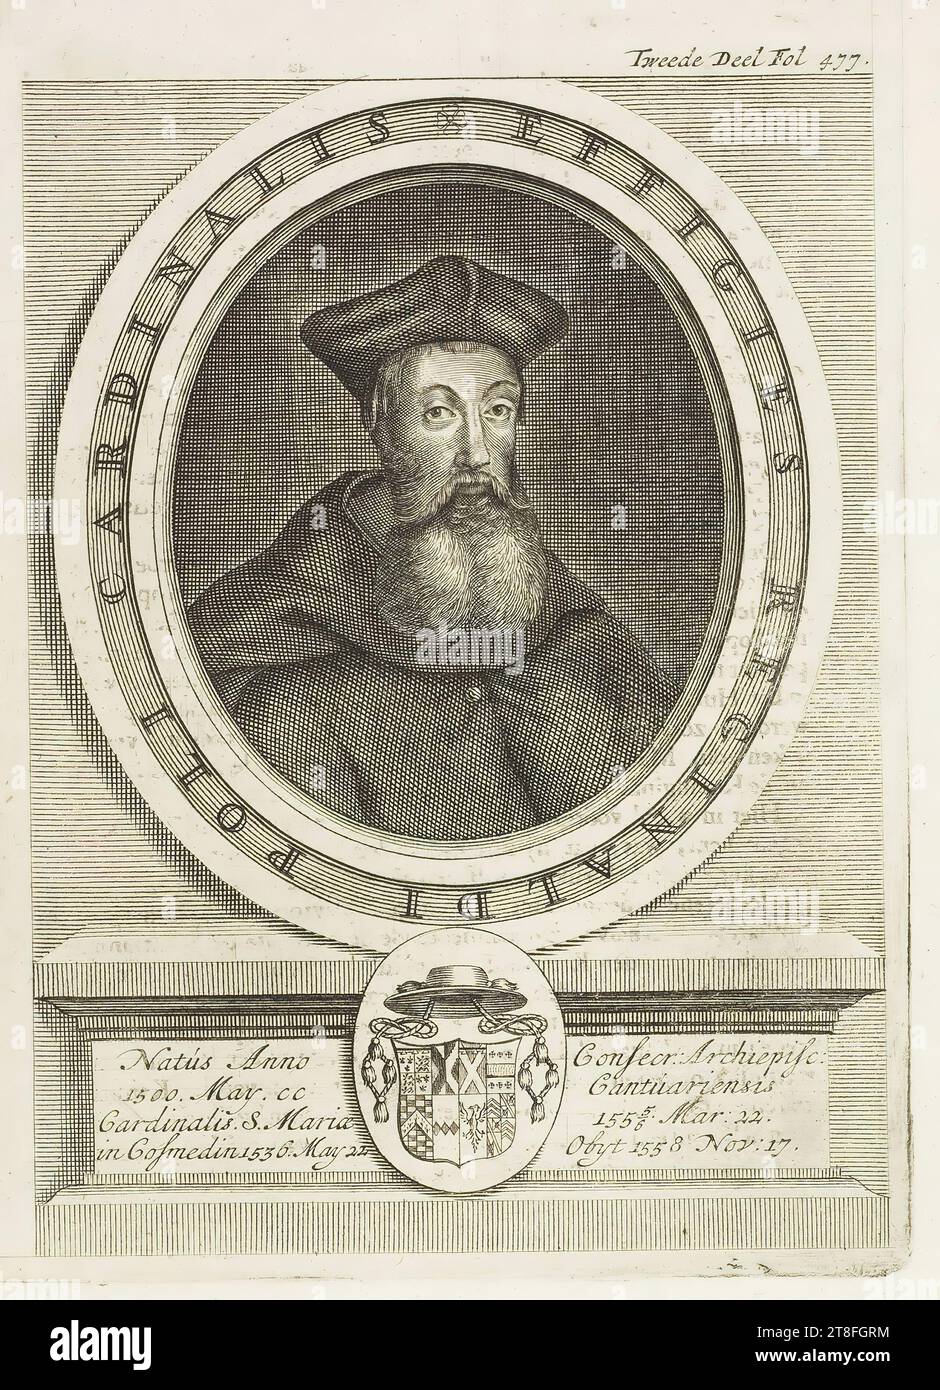 PORTRAIT OF REGINALDI POLI CARDINAL Born in the Year Consecr: Archiepisc:, 1500. May. cc of Cantuariensis, Cardinal of St. Mary 1555,6. Mar: 22., in Gosmedin 1536. May 22 Obyt 1558 Nov: 17. Second Volume Fol 477 Stock Photo